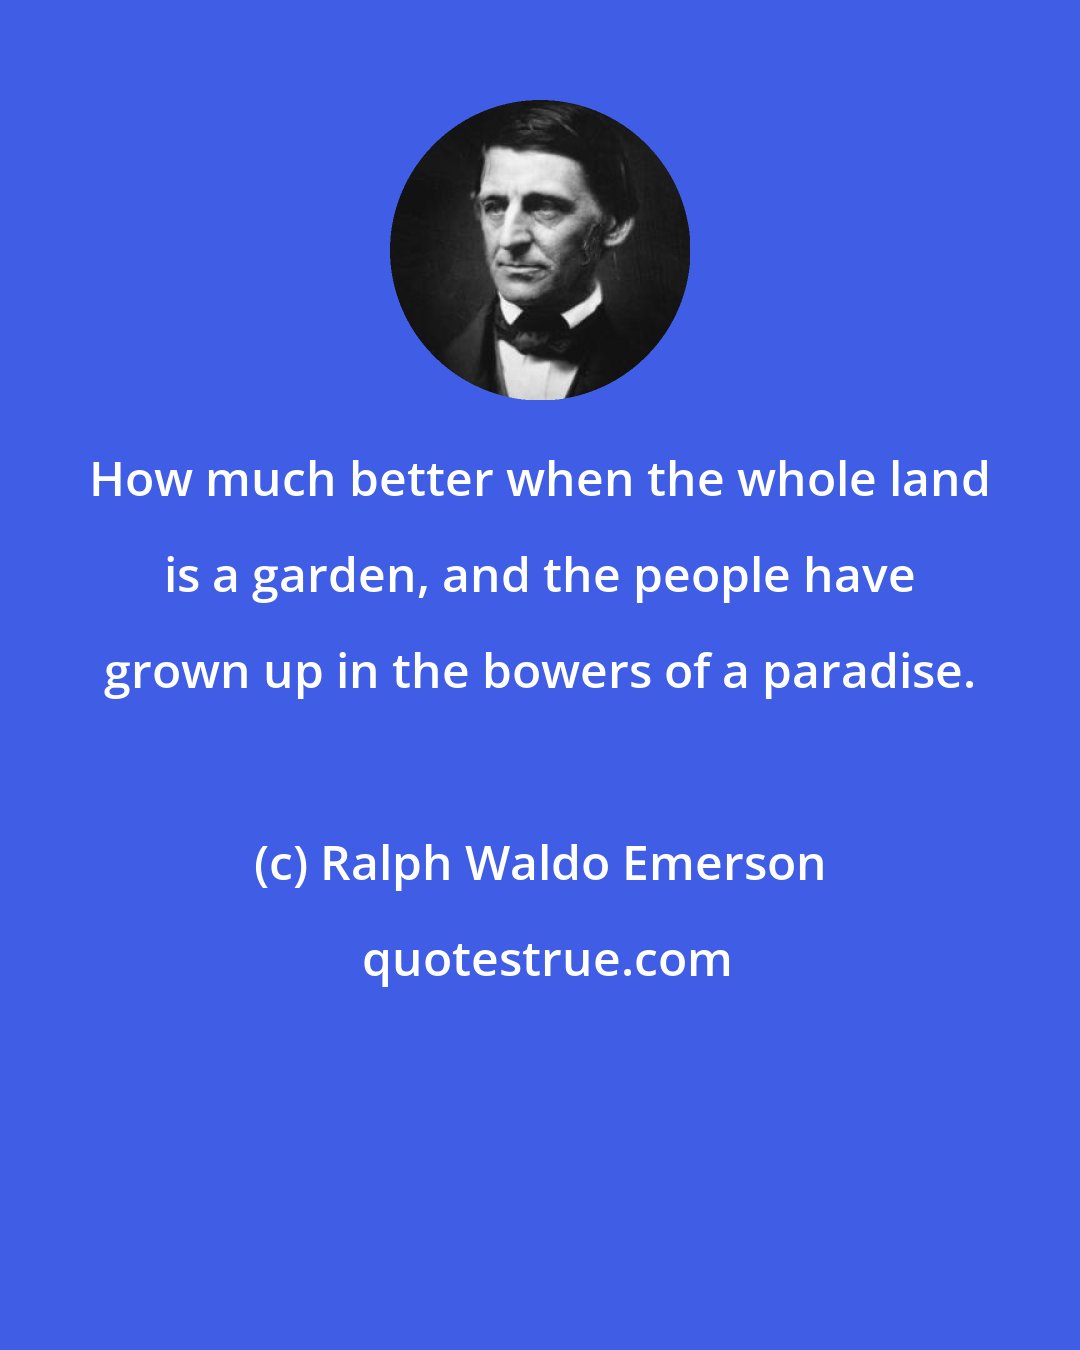 Ralph Waldo Emerson: How much better when the whole land is a garden, and the people have grown up in the bowers of a paradise.